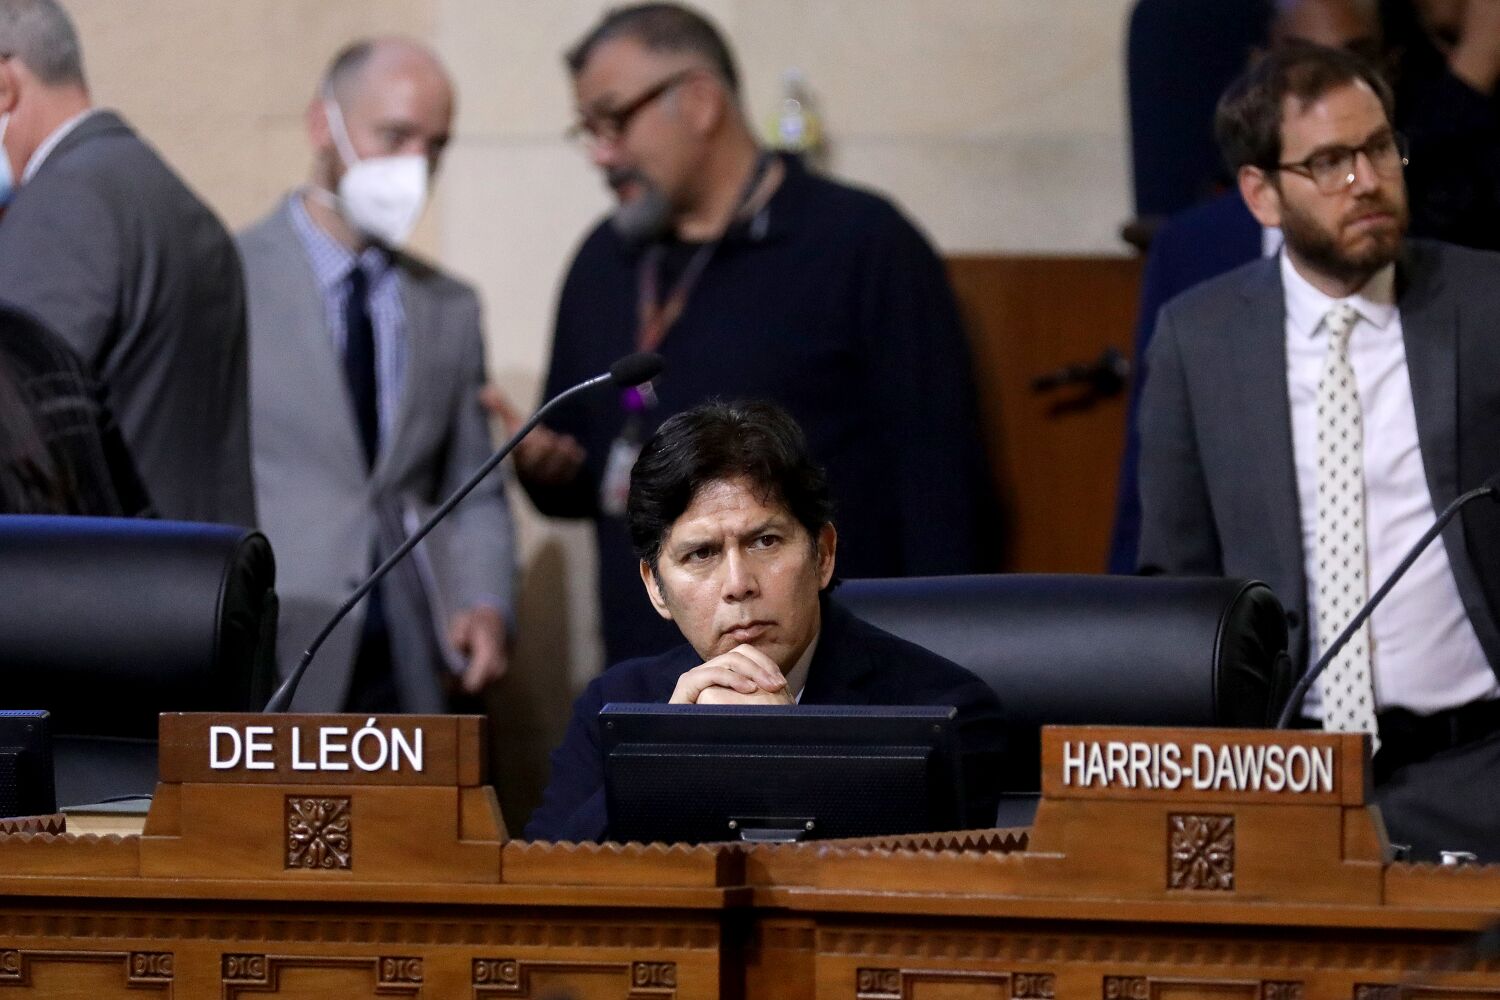 We asked Kevin de León's constituents what they've heard about him. Here's what they said